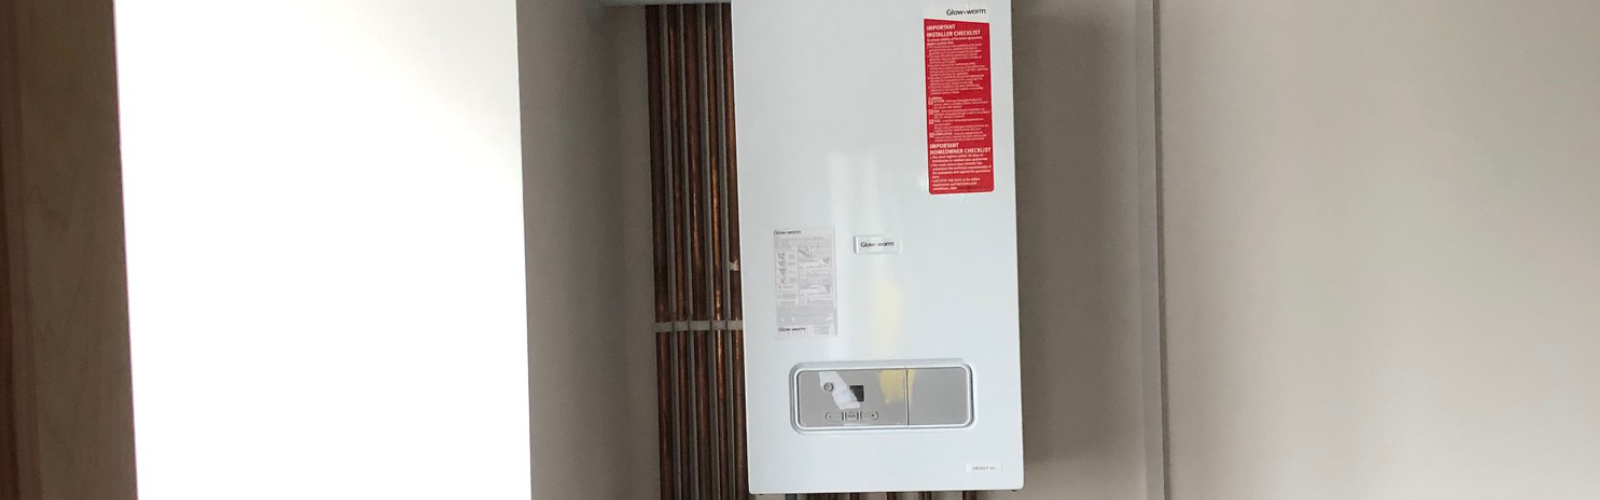 Boiler Installations and Maintenance